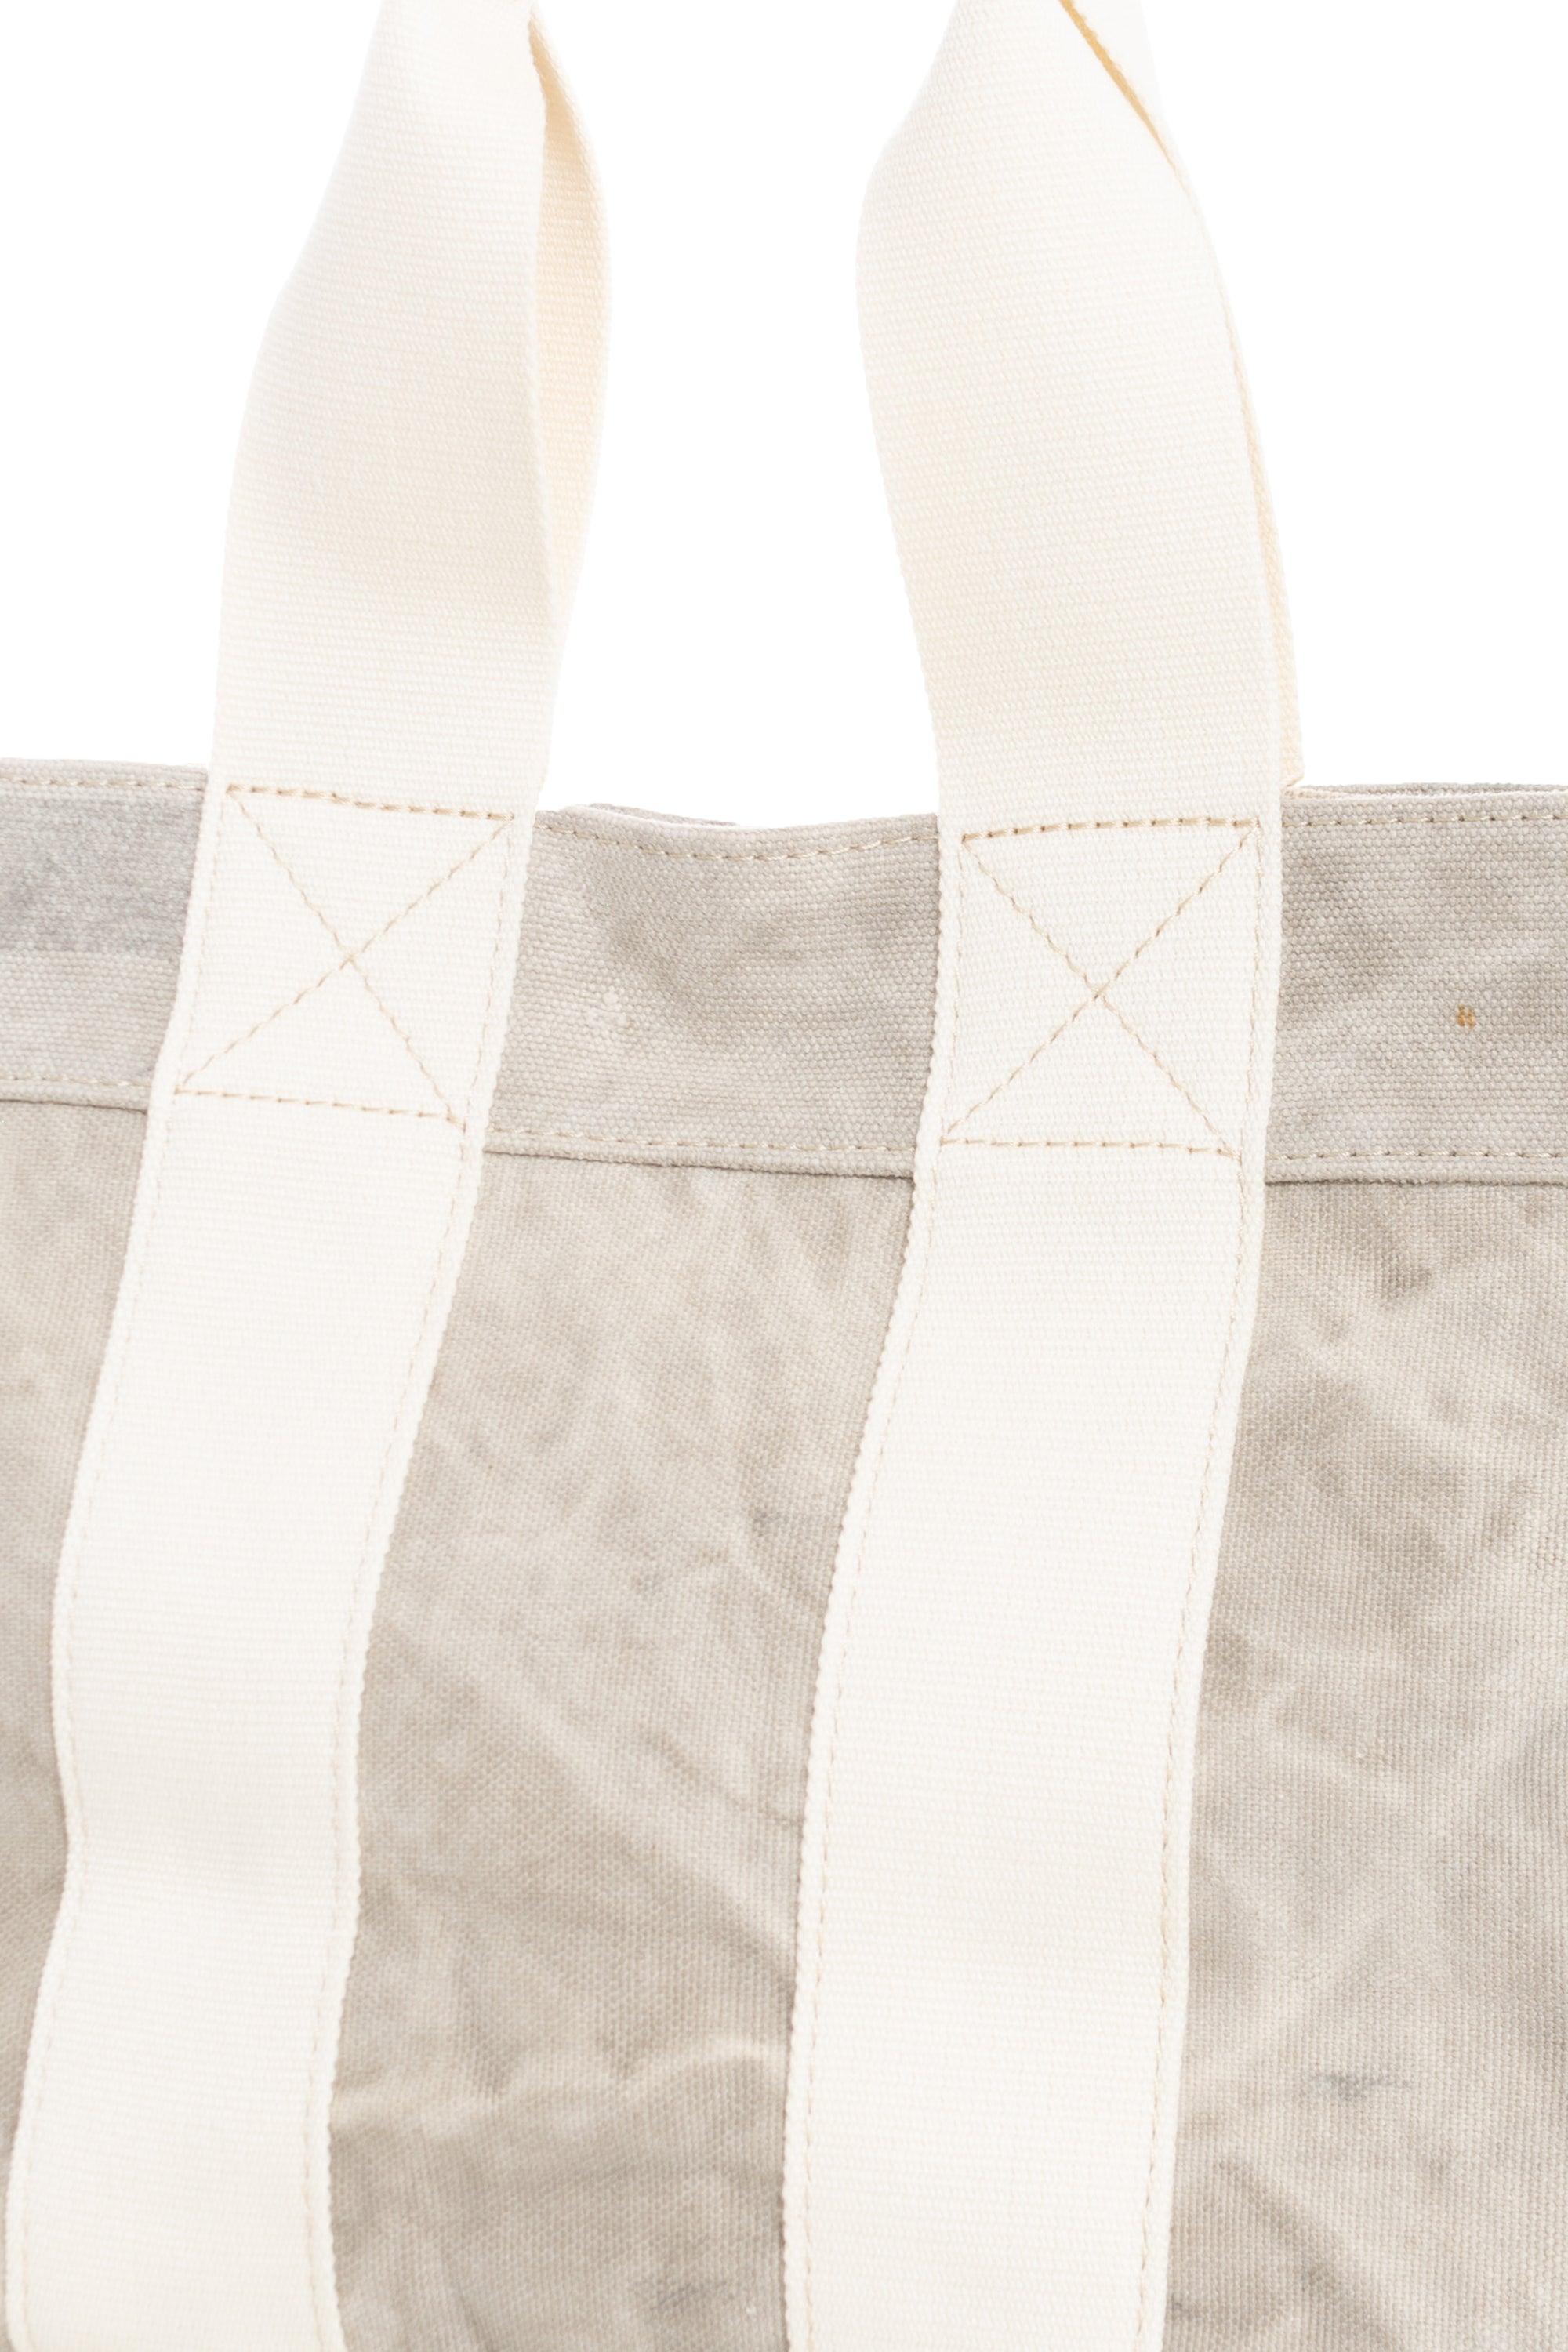 READYMADE Easy Tote Small in White | Lyst